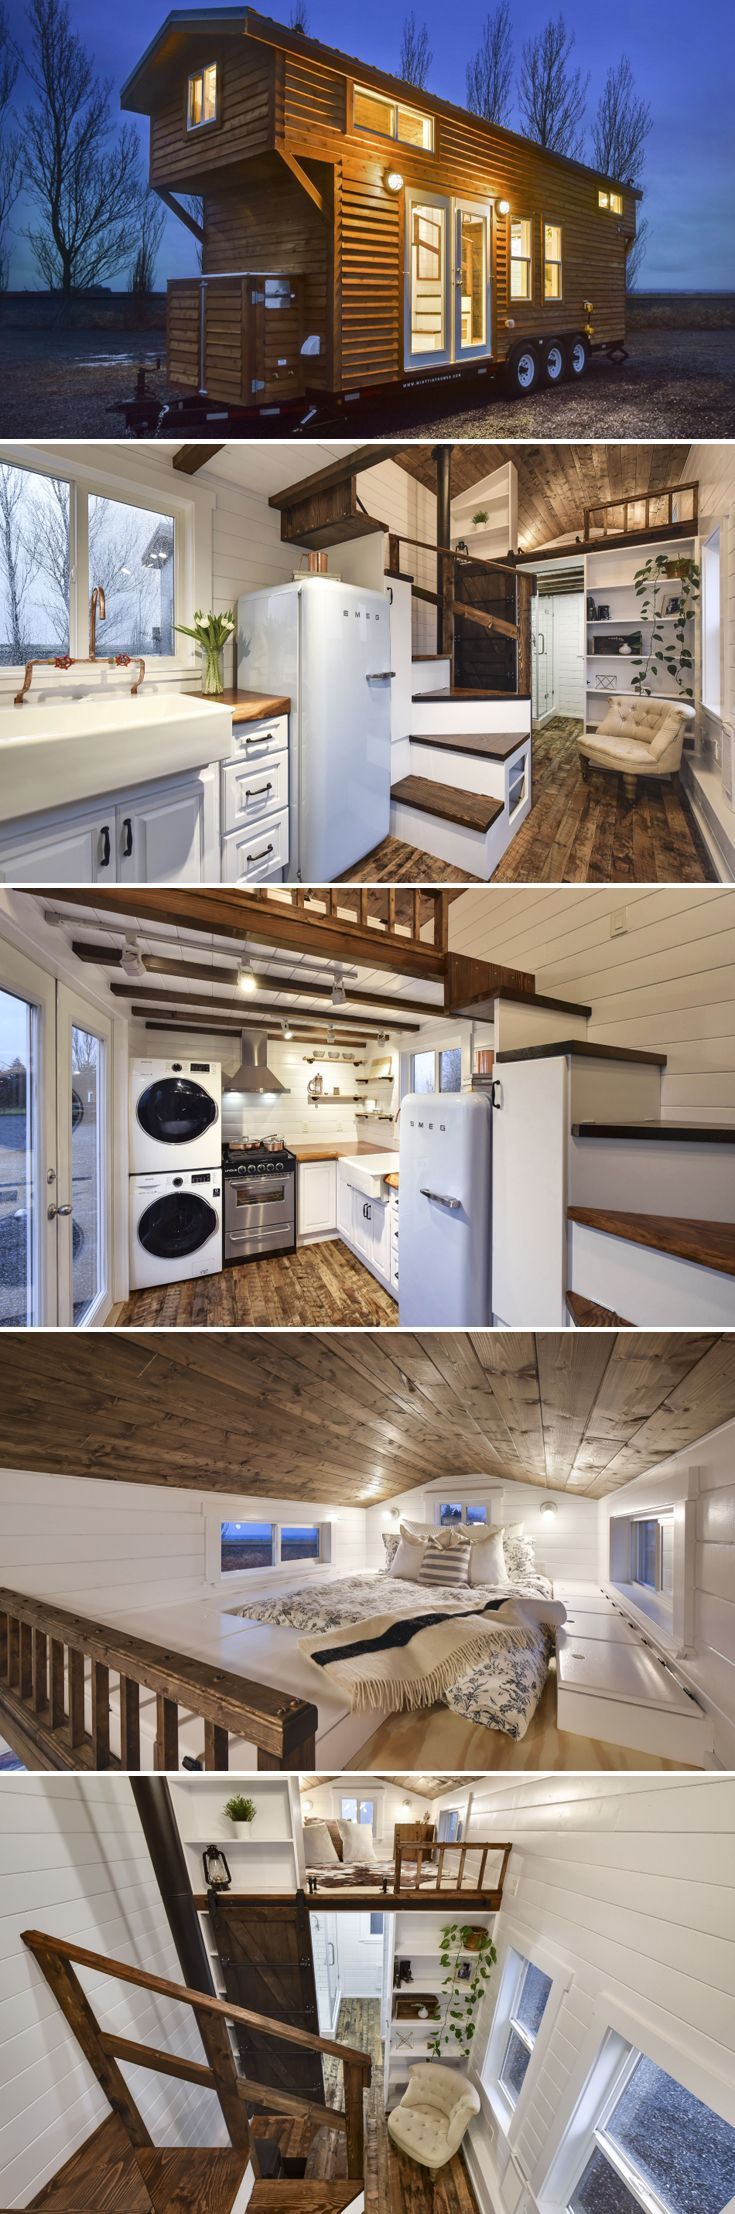 This custom tiny house has a traditional cabin style exterior with a rustic modern interior that blends white walls and cabinets